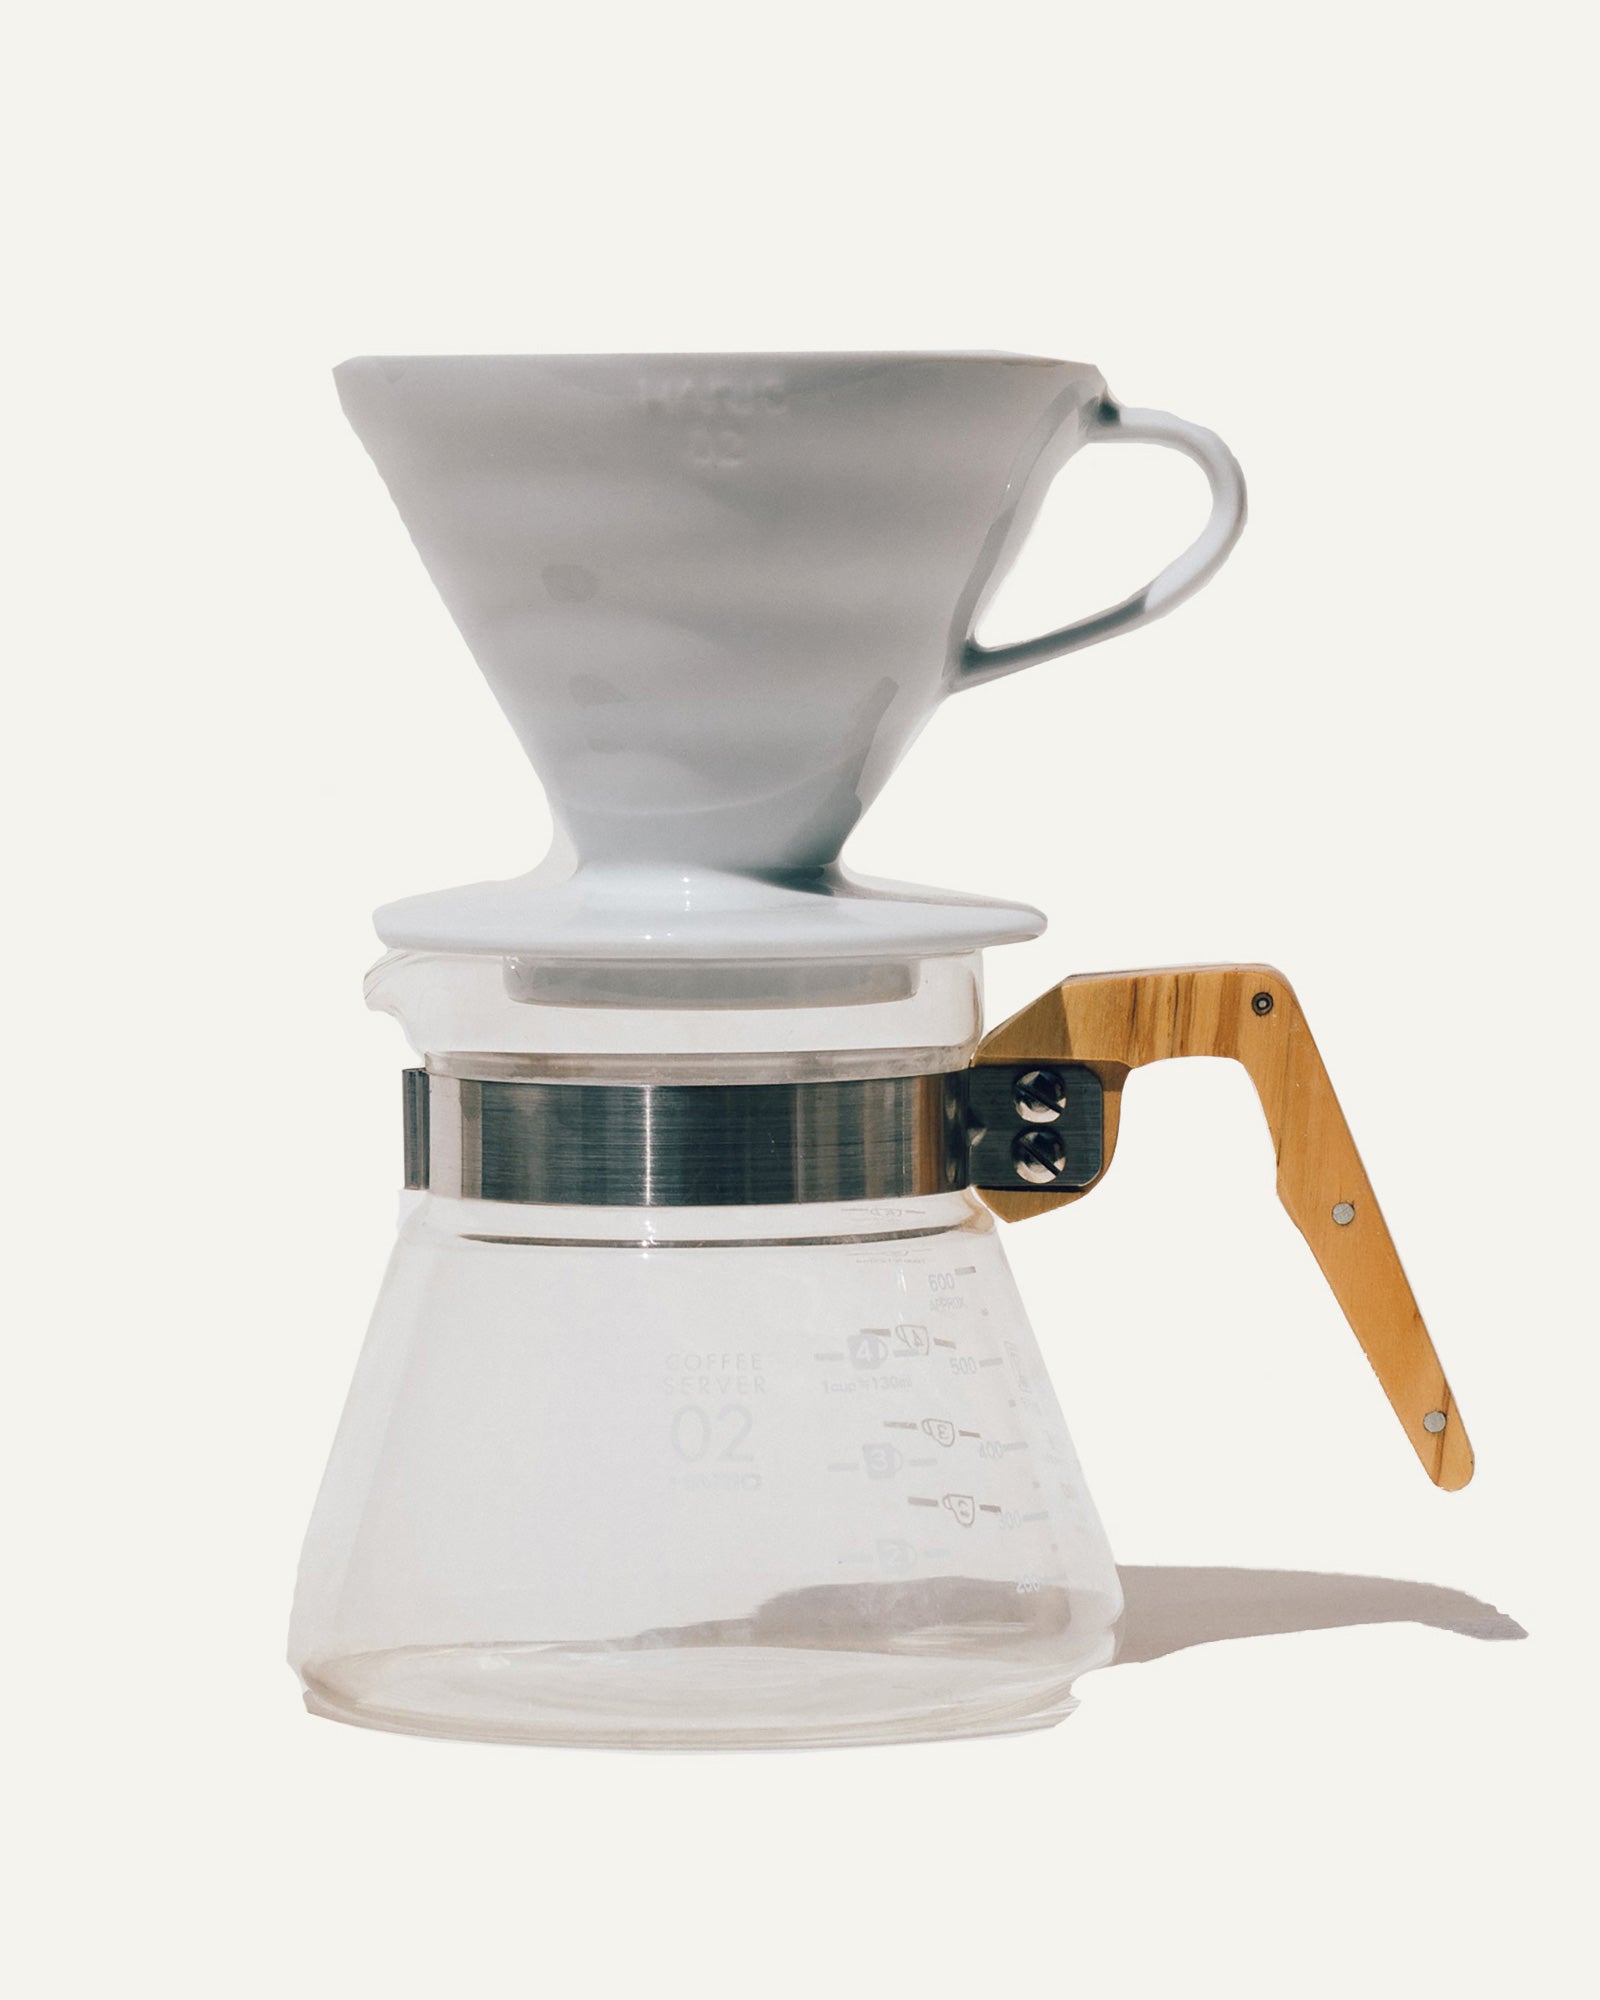 Glass range and wood + olivewood V60 pour over set by Canyon Coffee